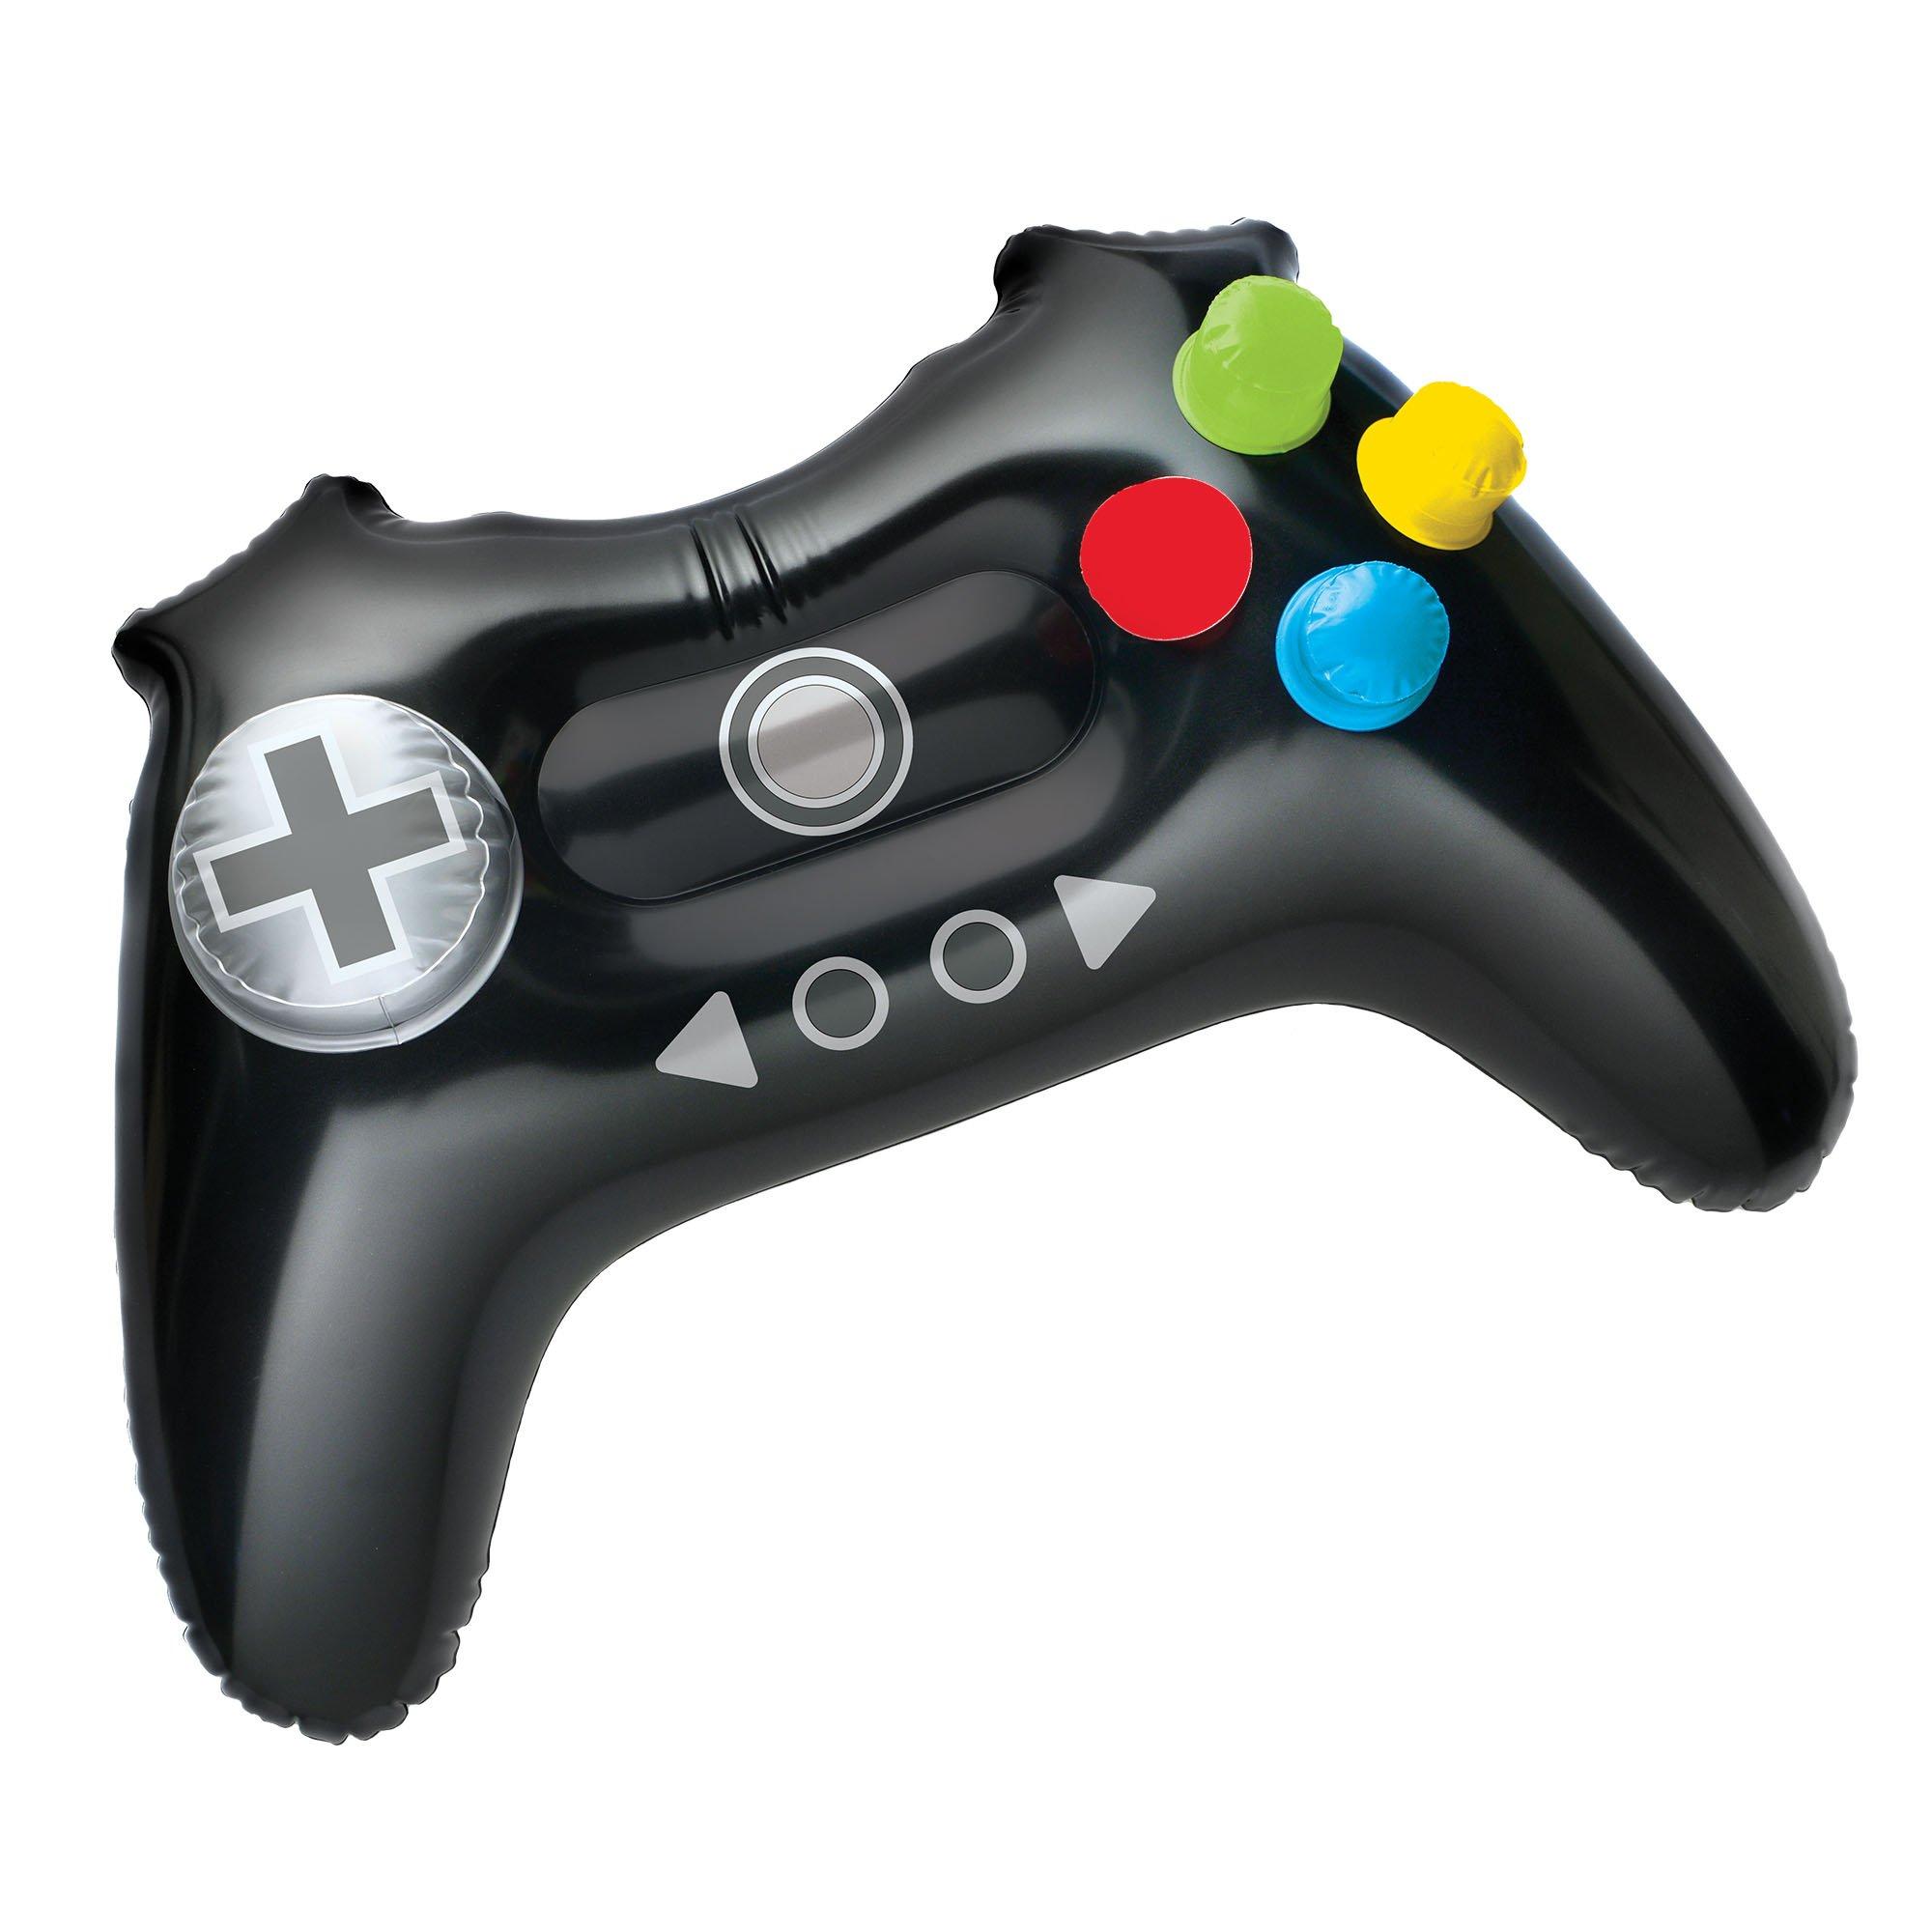 LAST CHANCE - LIMITED STOCK - SALE - Video Game Remote Controller Bubb